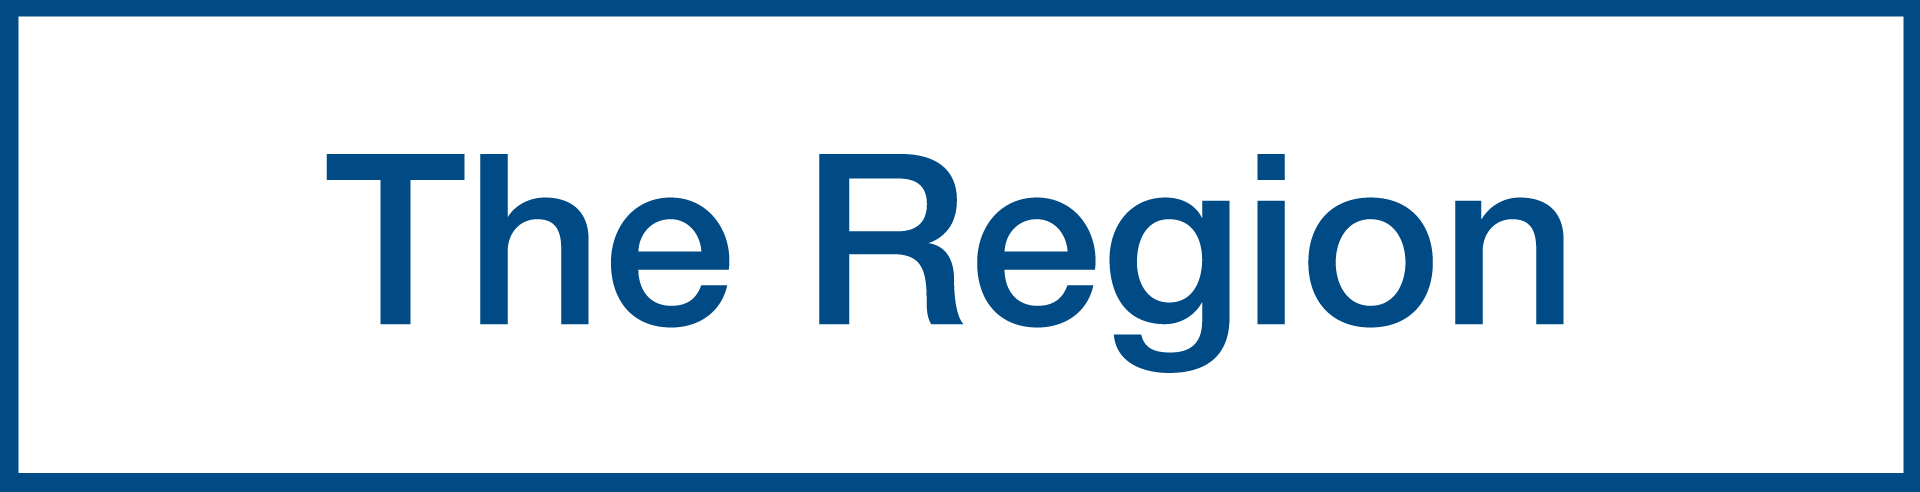 The Region Logo - The Region | Federal Reserve Bank of Minneapolis